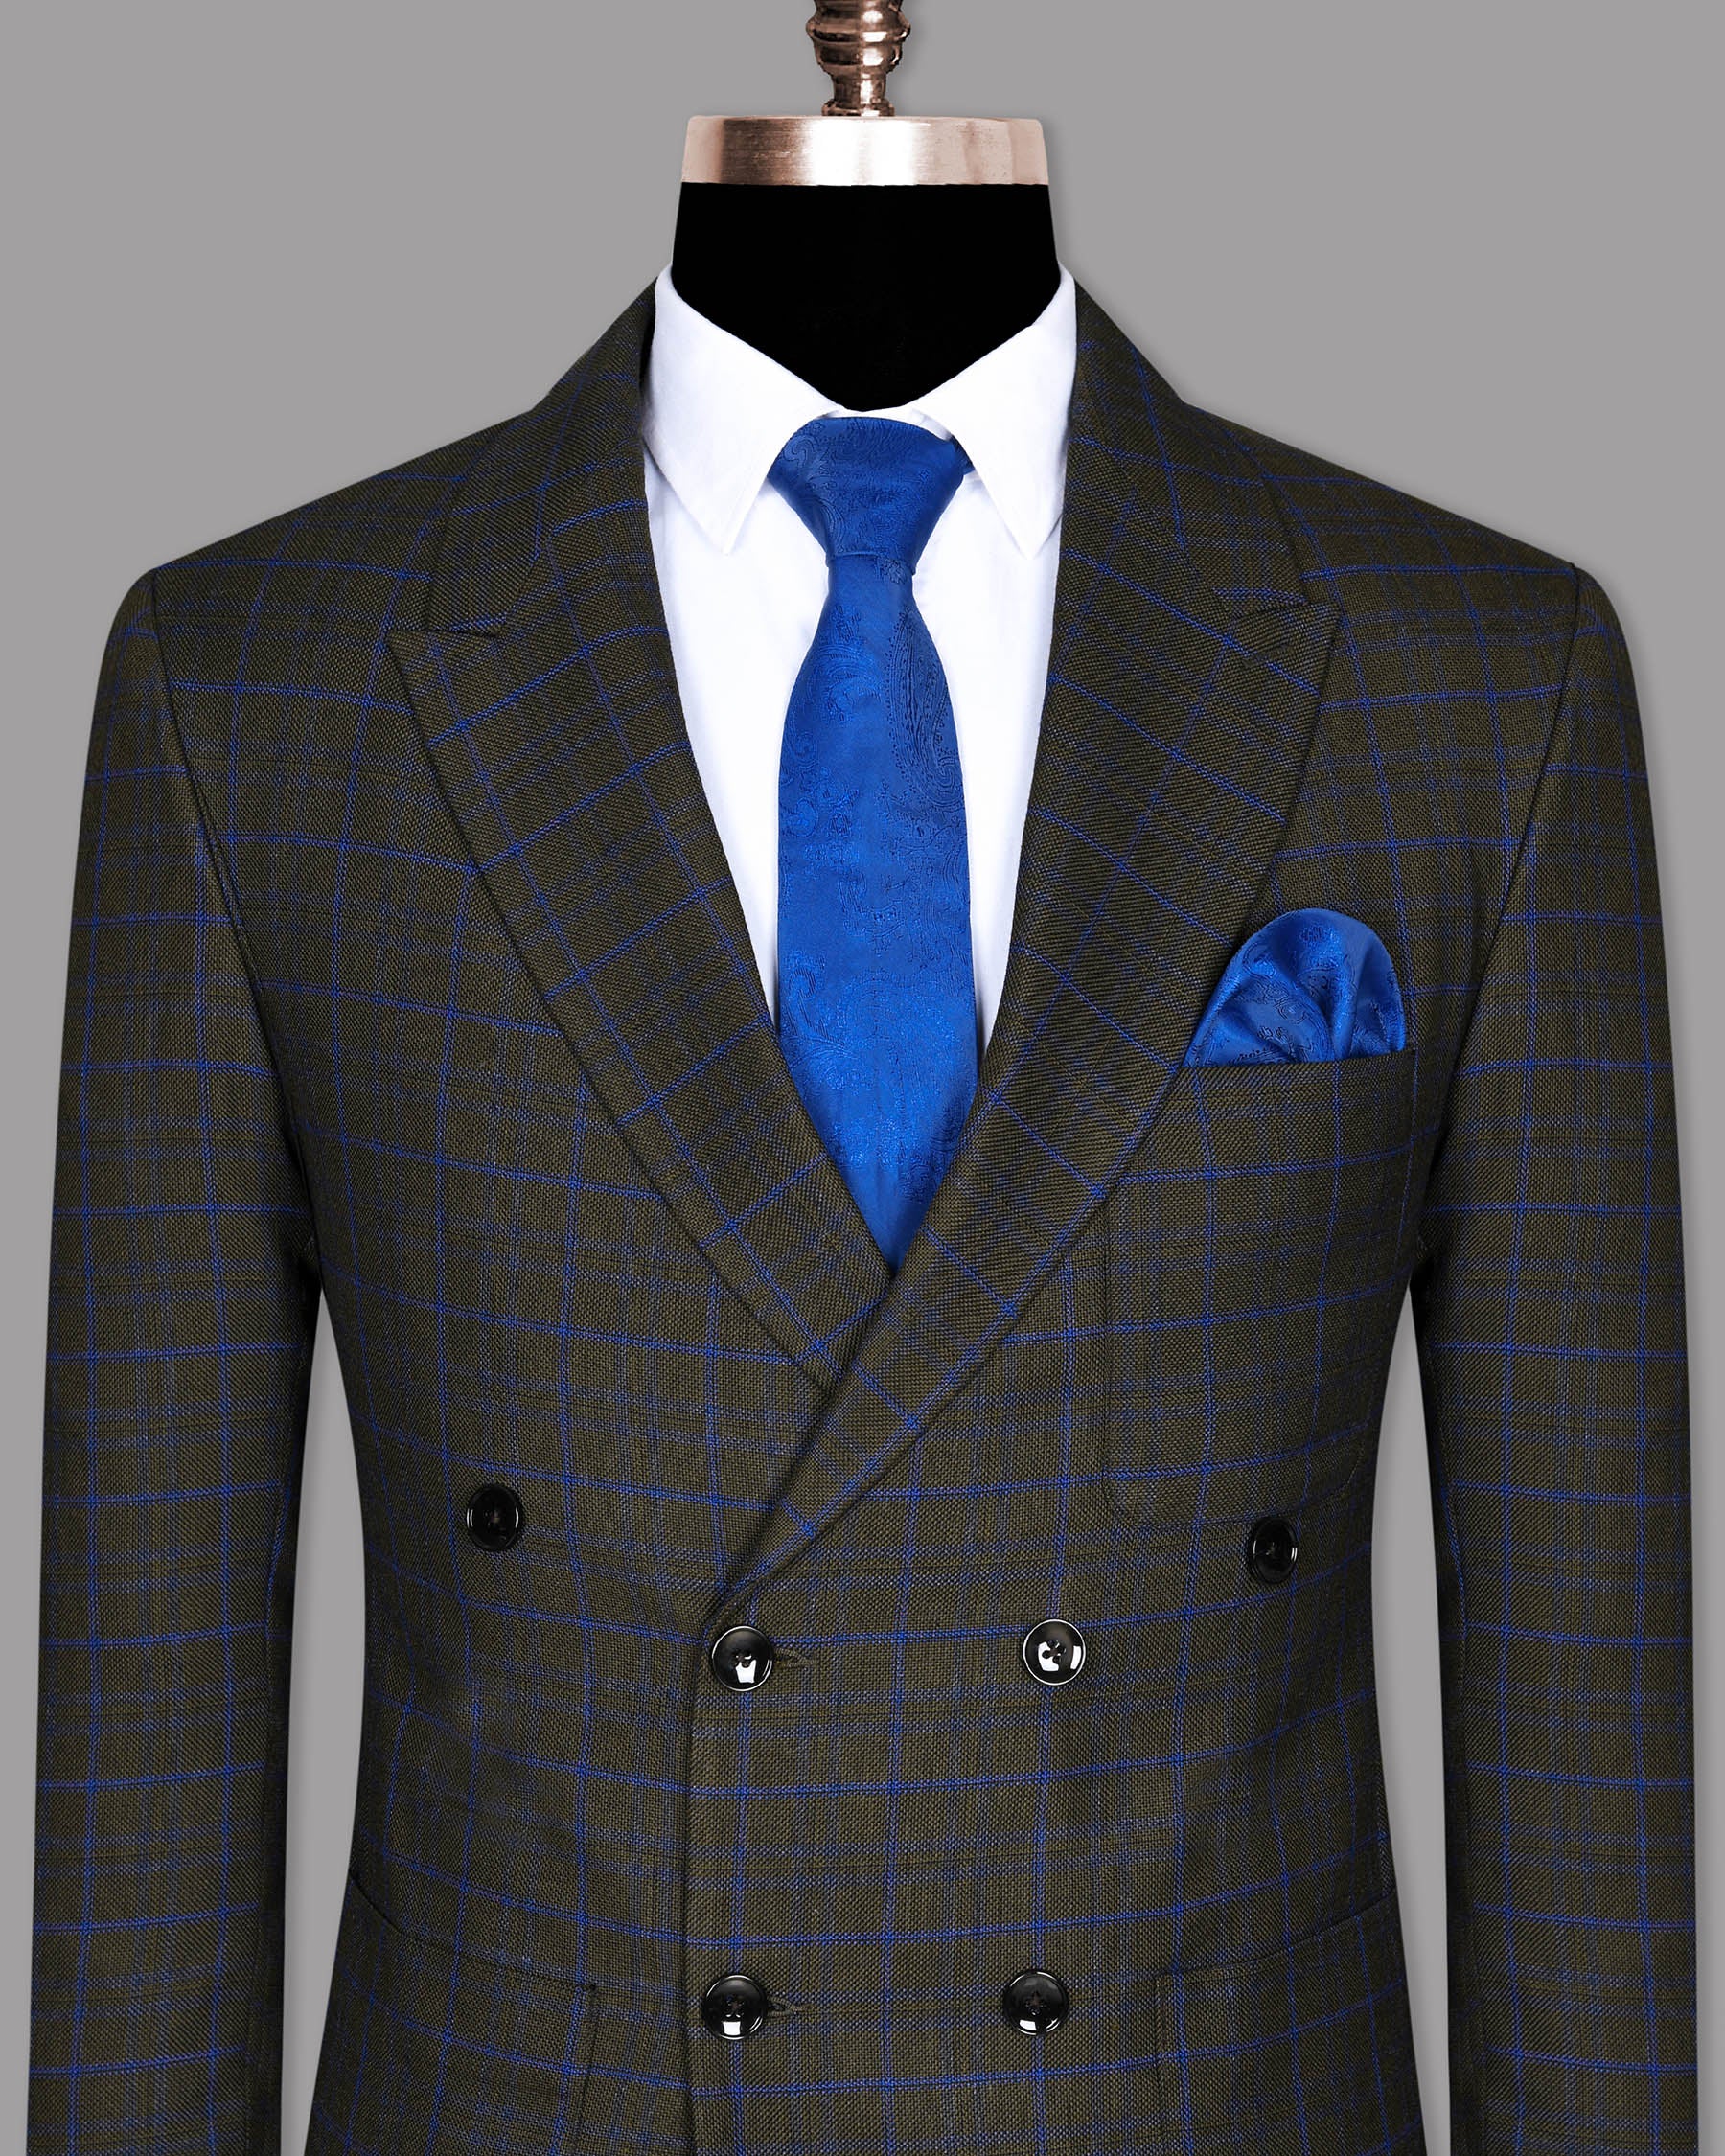 Wood Brown with Royal Blue windowpane Wool Double Breasted Tweed Blazer BL690DB-PP-36, BL690DB-PP-38, BL690DB-PP-40, BL690DB-PP-46, BL690DB-PP-50, BL690DB-PP-44, BL690DB-PP-42, BL690DB-PP-48, BL690DB-PP-52, BL690DB-PP-54, BL690DB-PP-56, BL690DB-PP-58, BL690DB-PP-60